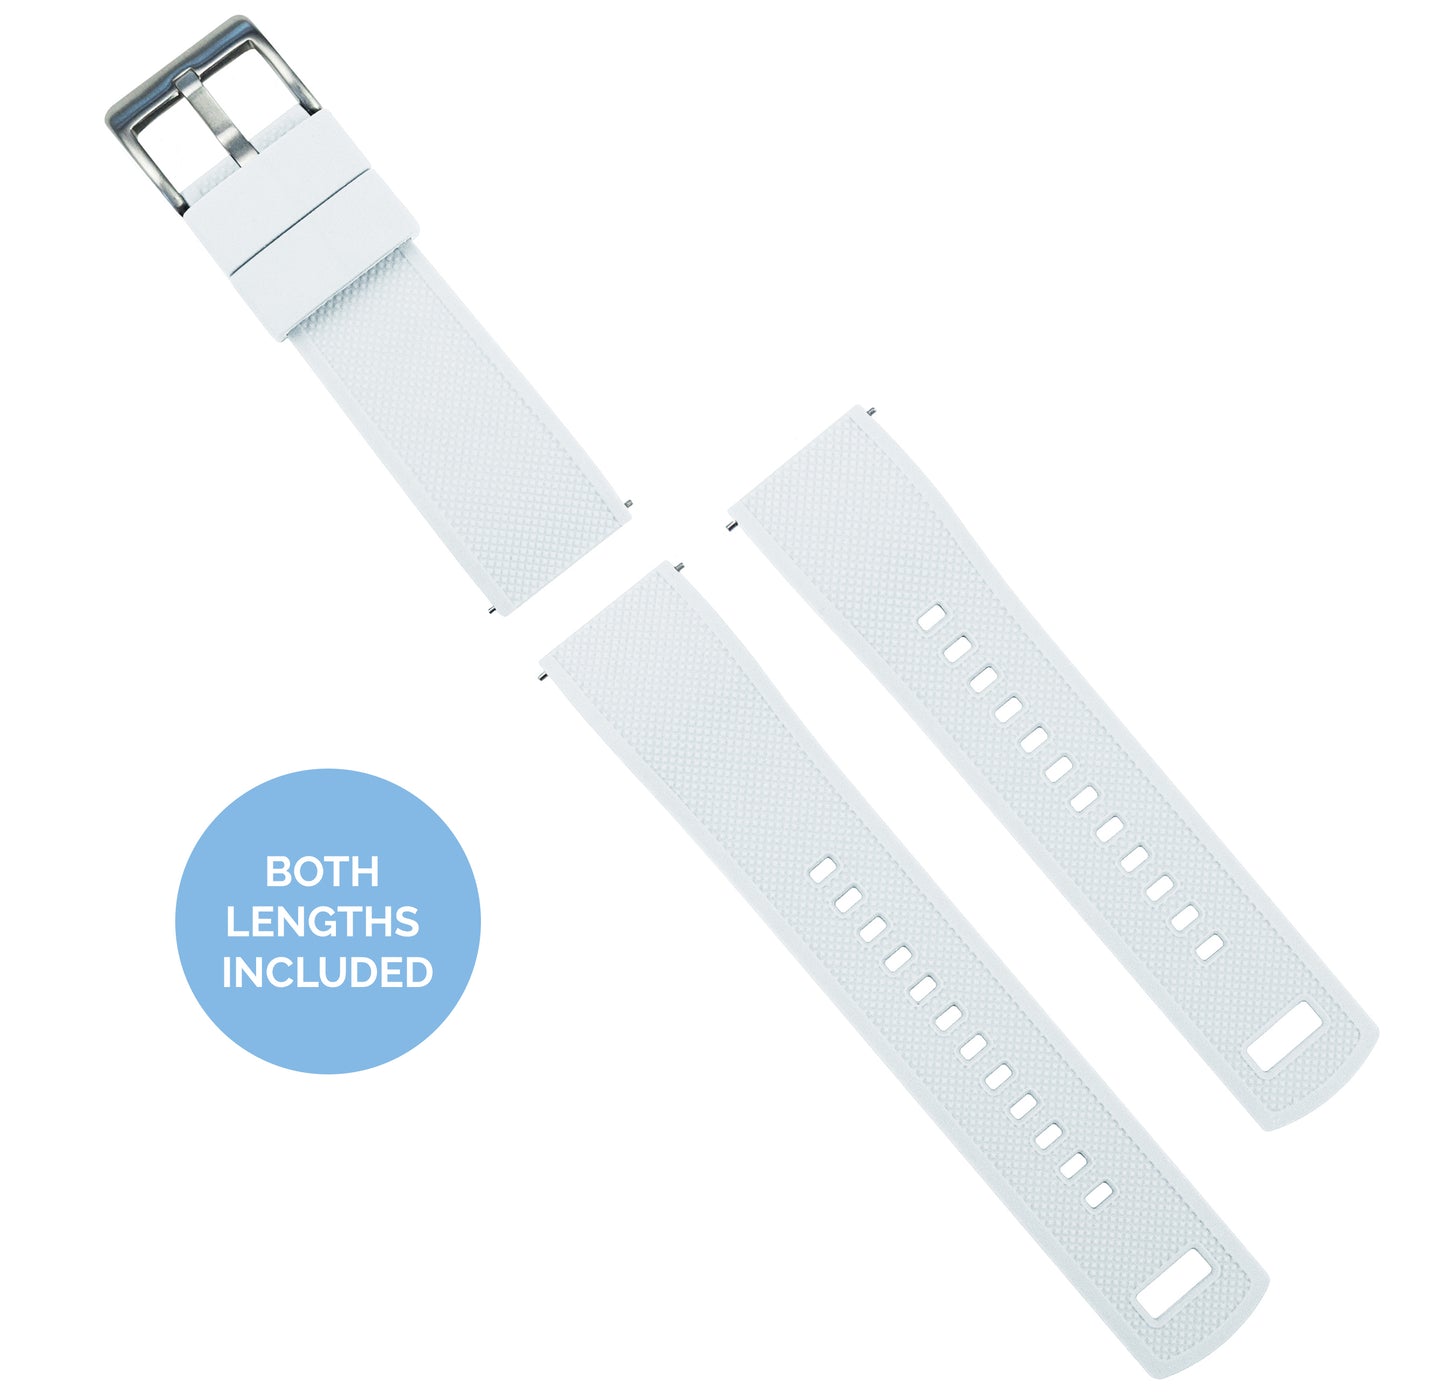 Fossil Sport | Elite Silicone | White Top / Black Bottom - Barton Watch Bands